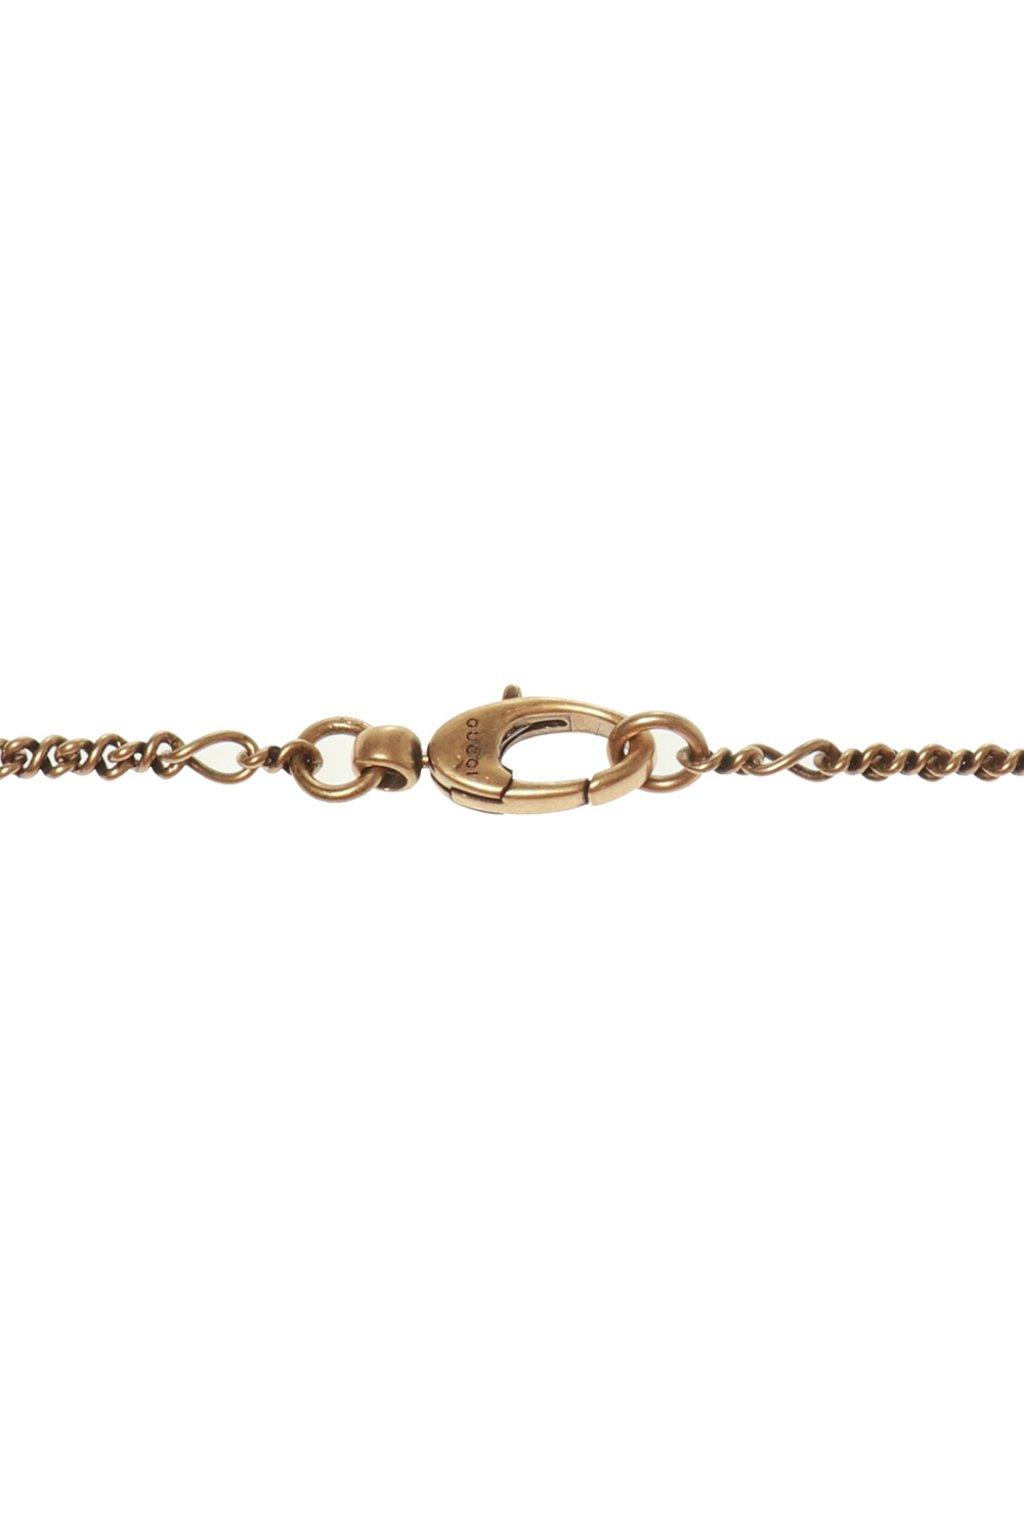 Gucci Strawberry Necklace in Gold (Metallic) | Lyst